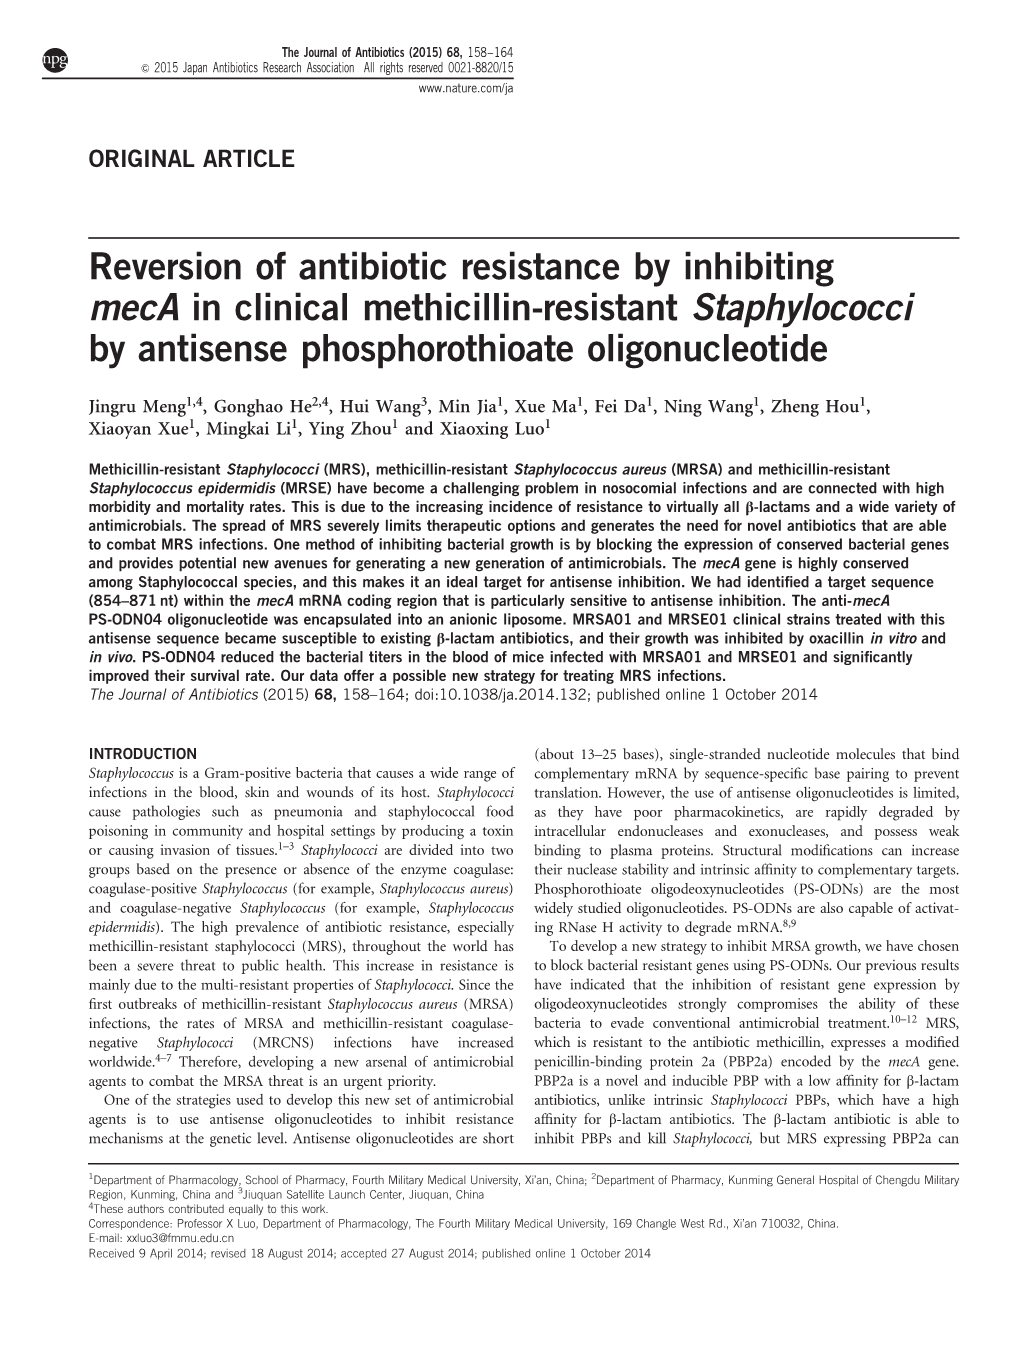 Reversion of Antibiotic Resistance by Inhibiting Meca in Clinical Methicillin-Resistant Staphylococci by Antisense Phosphorothioate Oligonucleotide